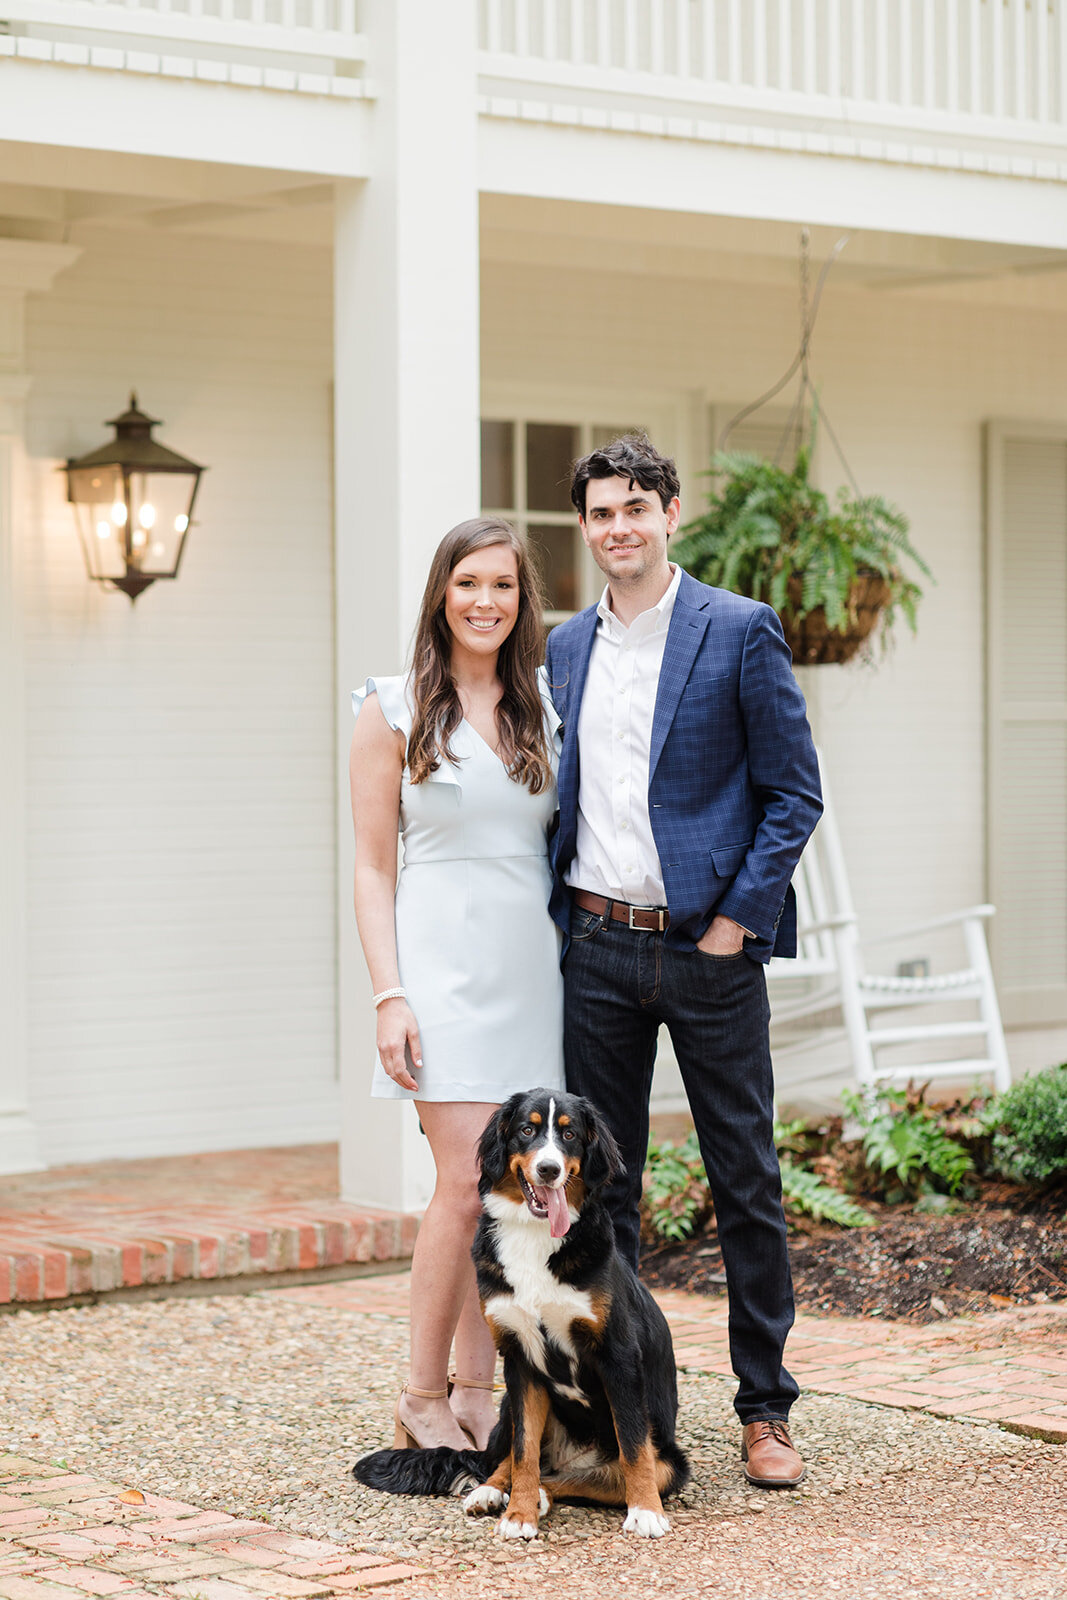 Traditional engagement portrait at home with dog